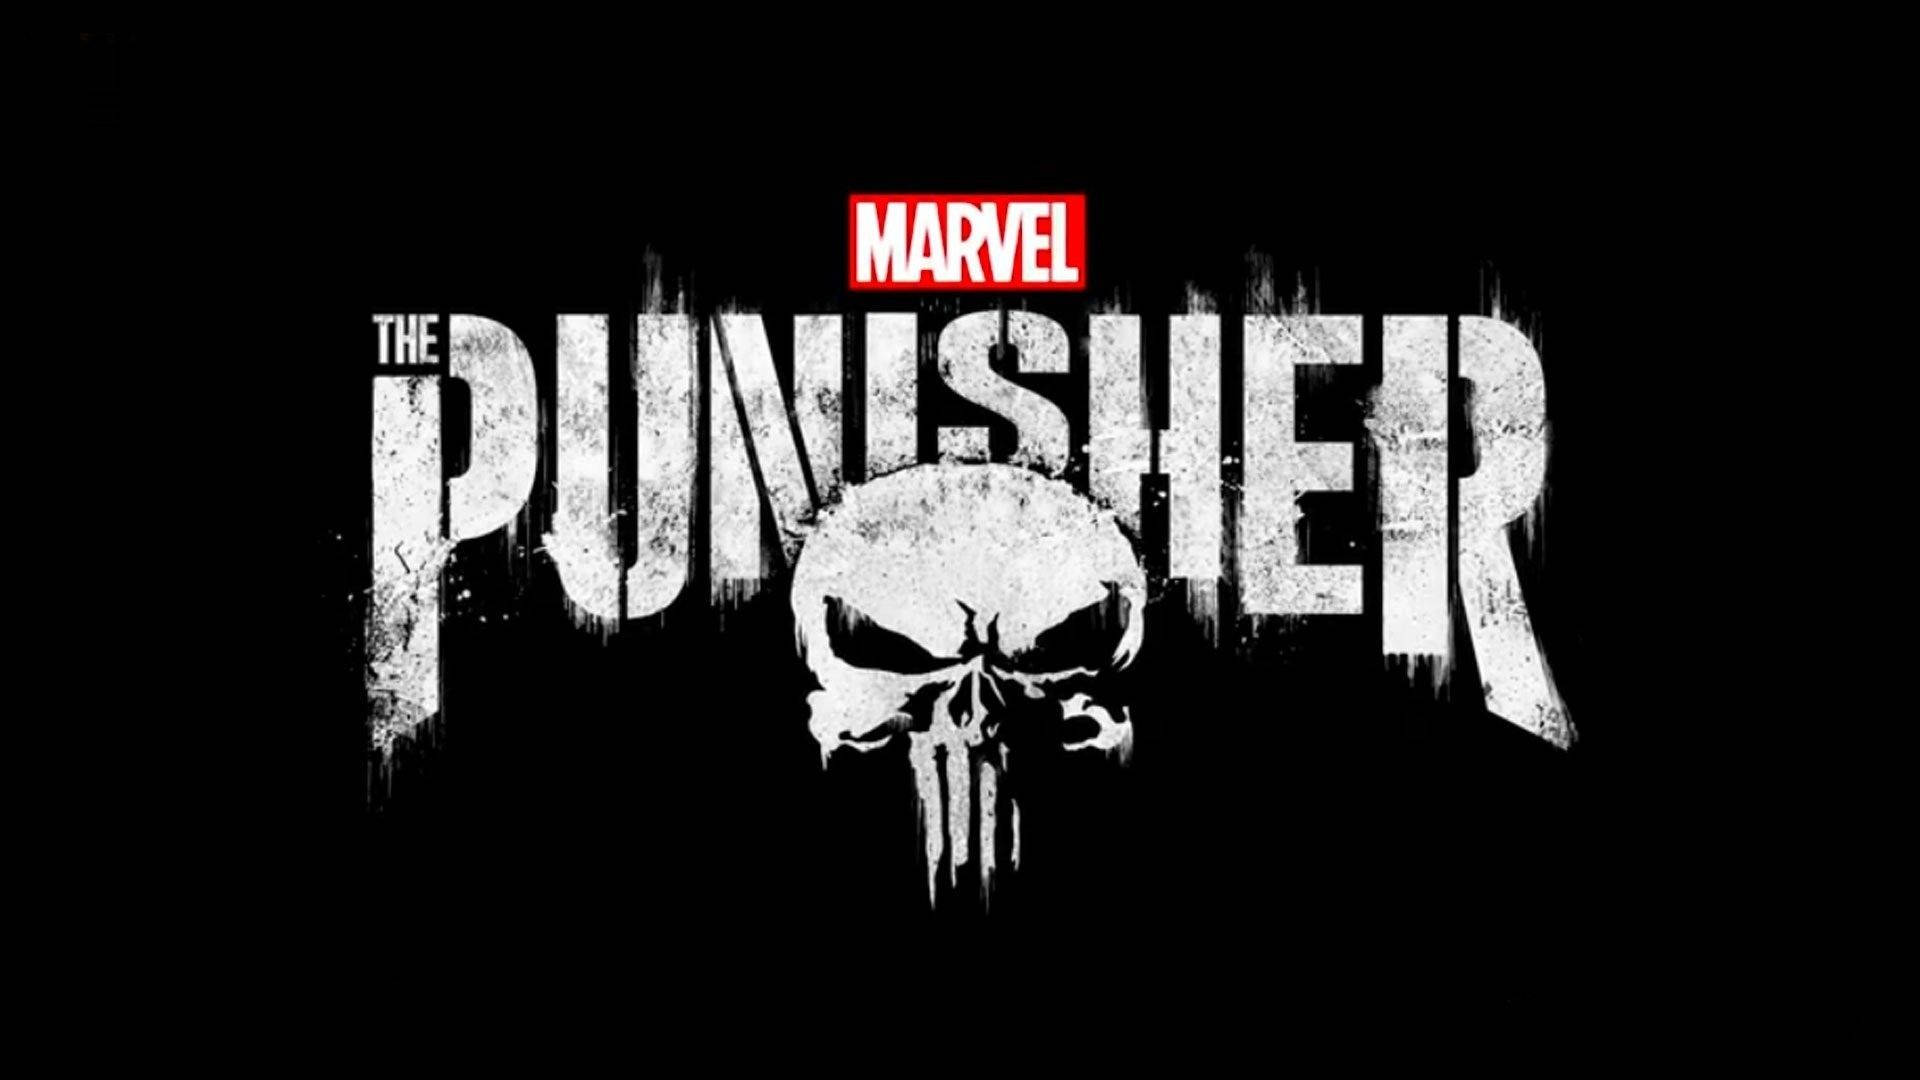 Free Punisher Wallpaper Downloads, [100+] Punisher Wallpapers for FREE |  